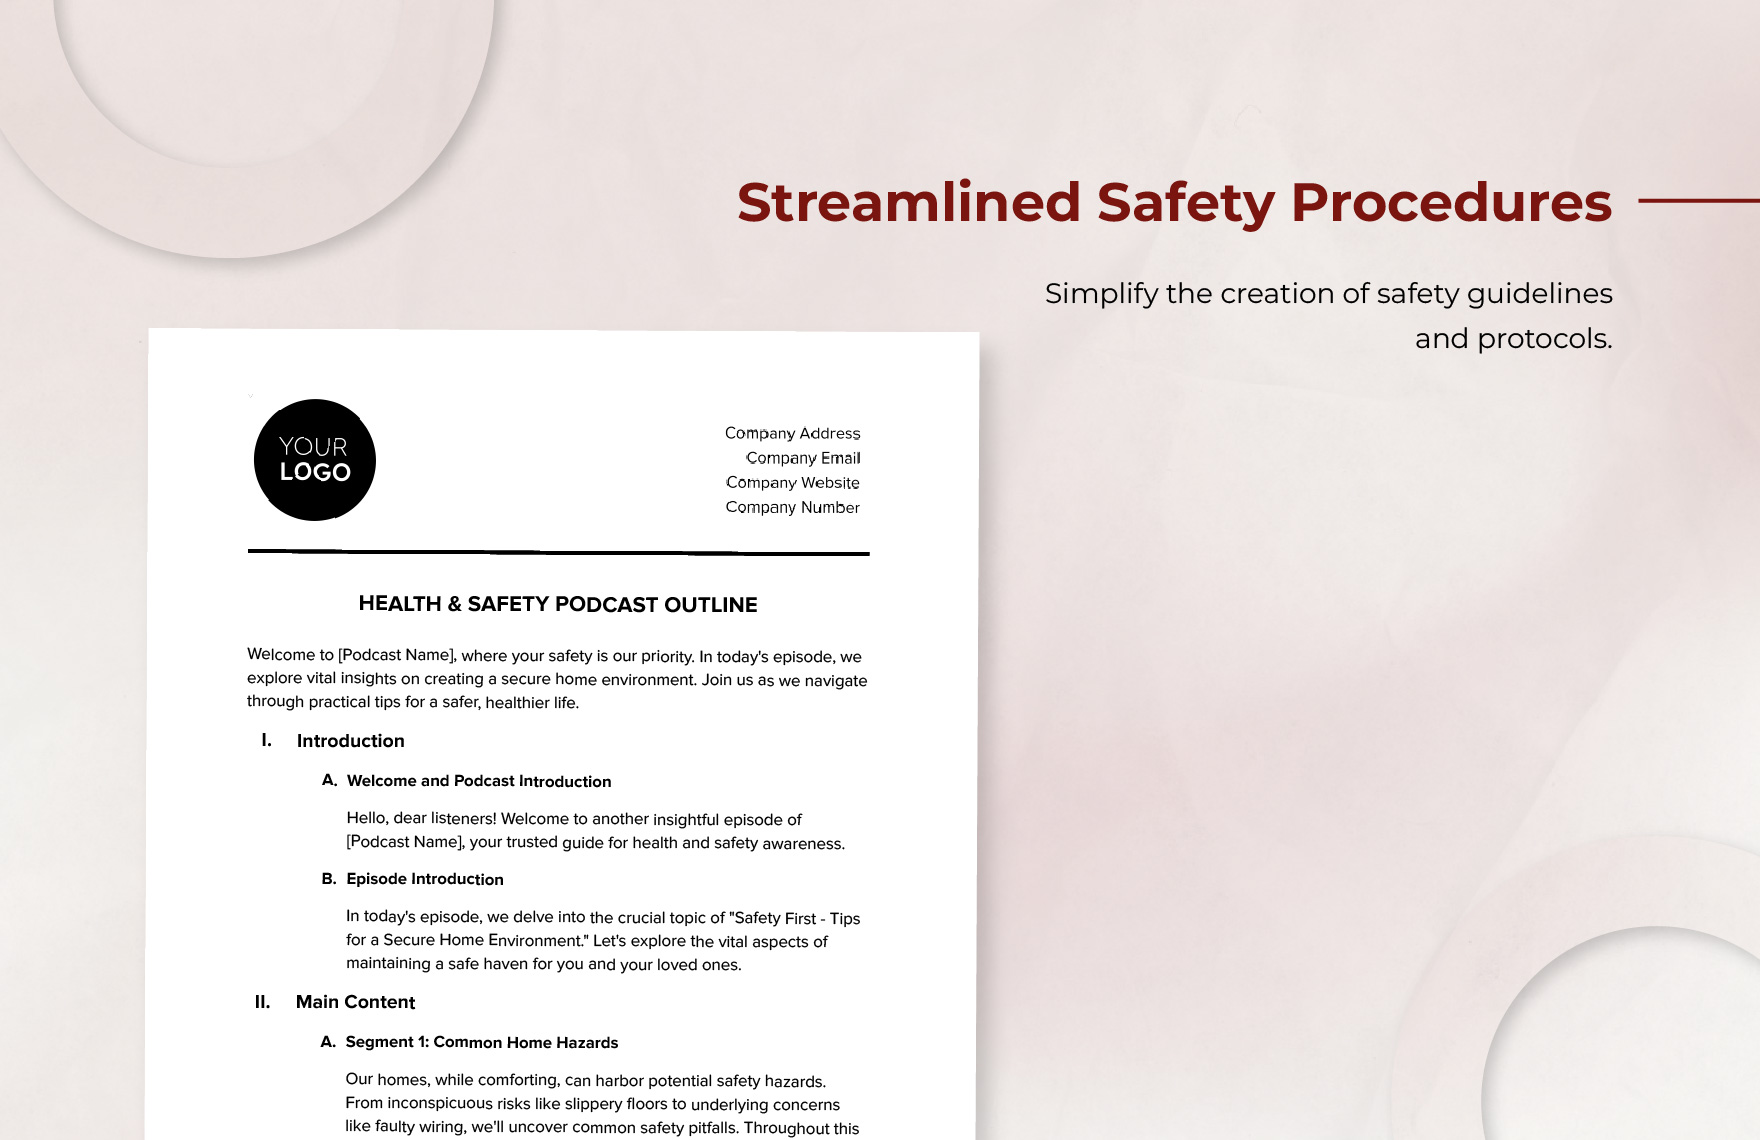 Health & Safety Podcast Outline Template